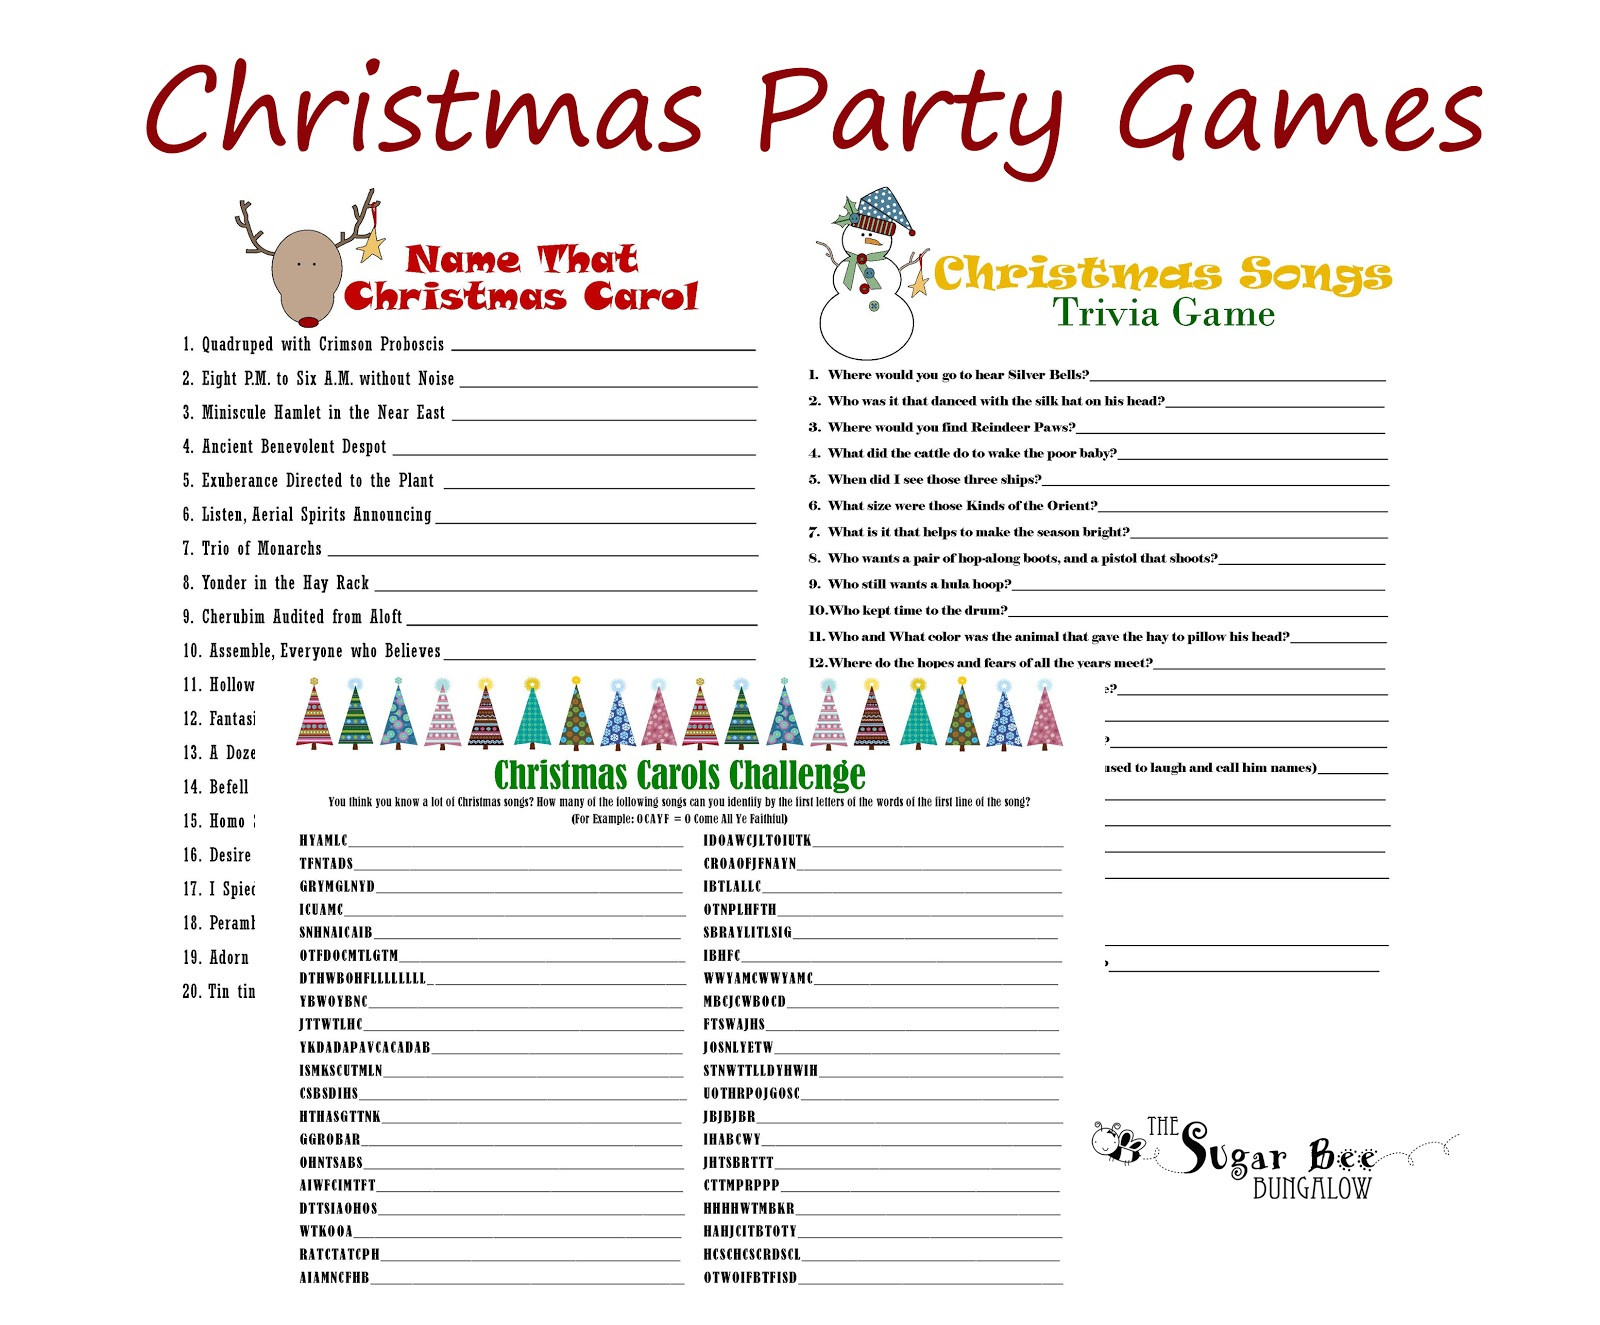 Christmas Party Game Ideas For Adults
 The Sugar Bee Bungalow December 2012